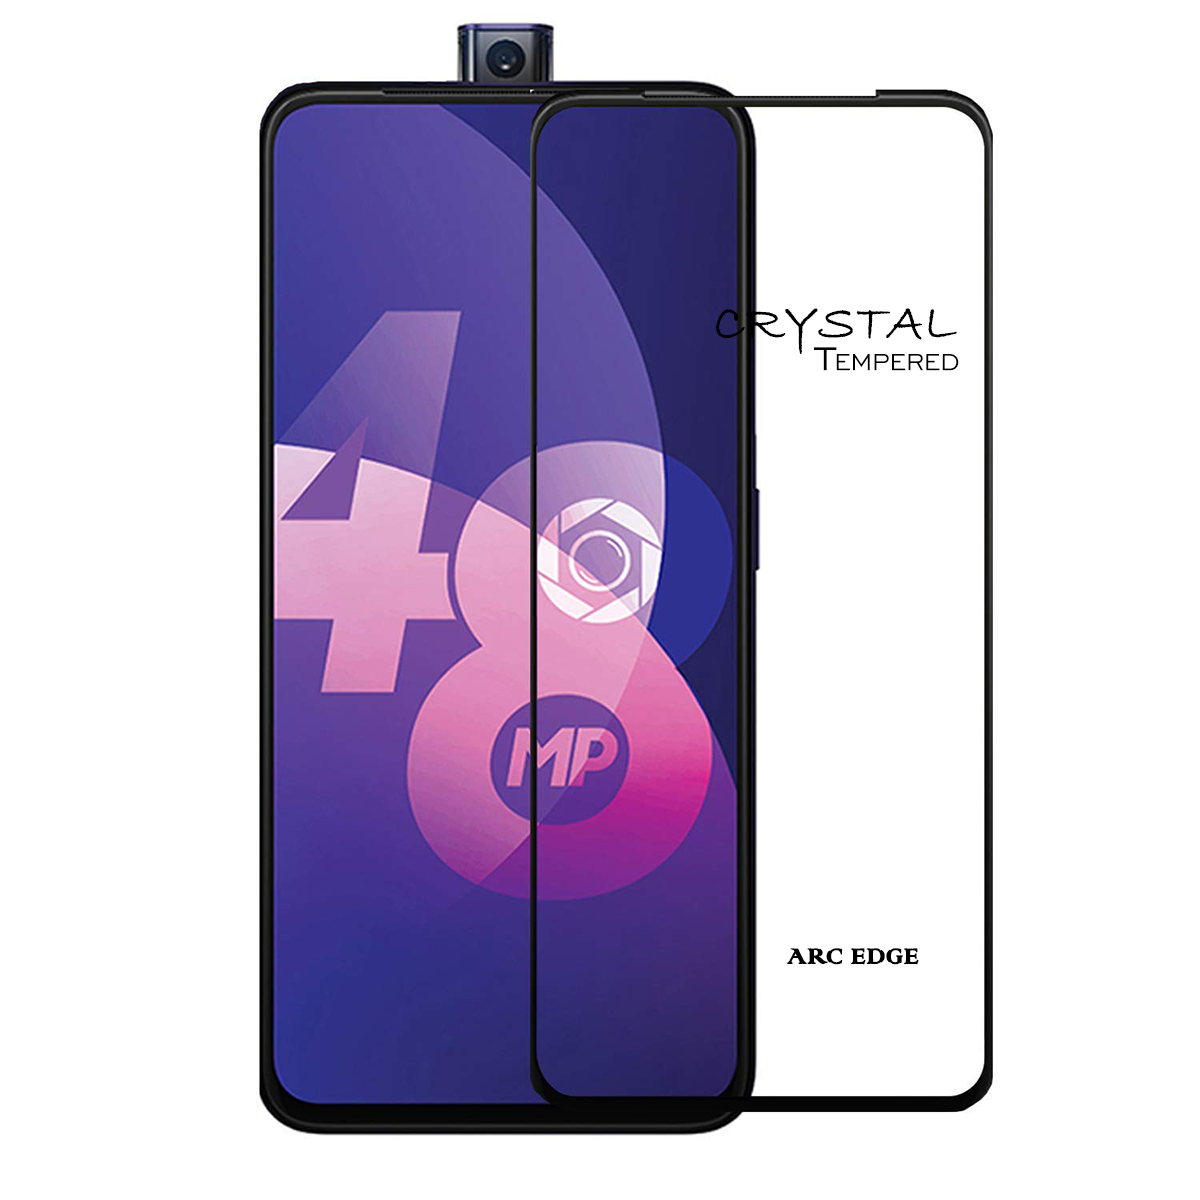 iFix Crystal 5D Tempered Glass for OPPO F11 PRO/K3/REALME X